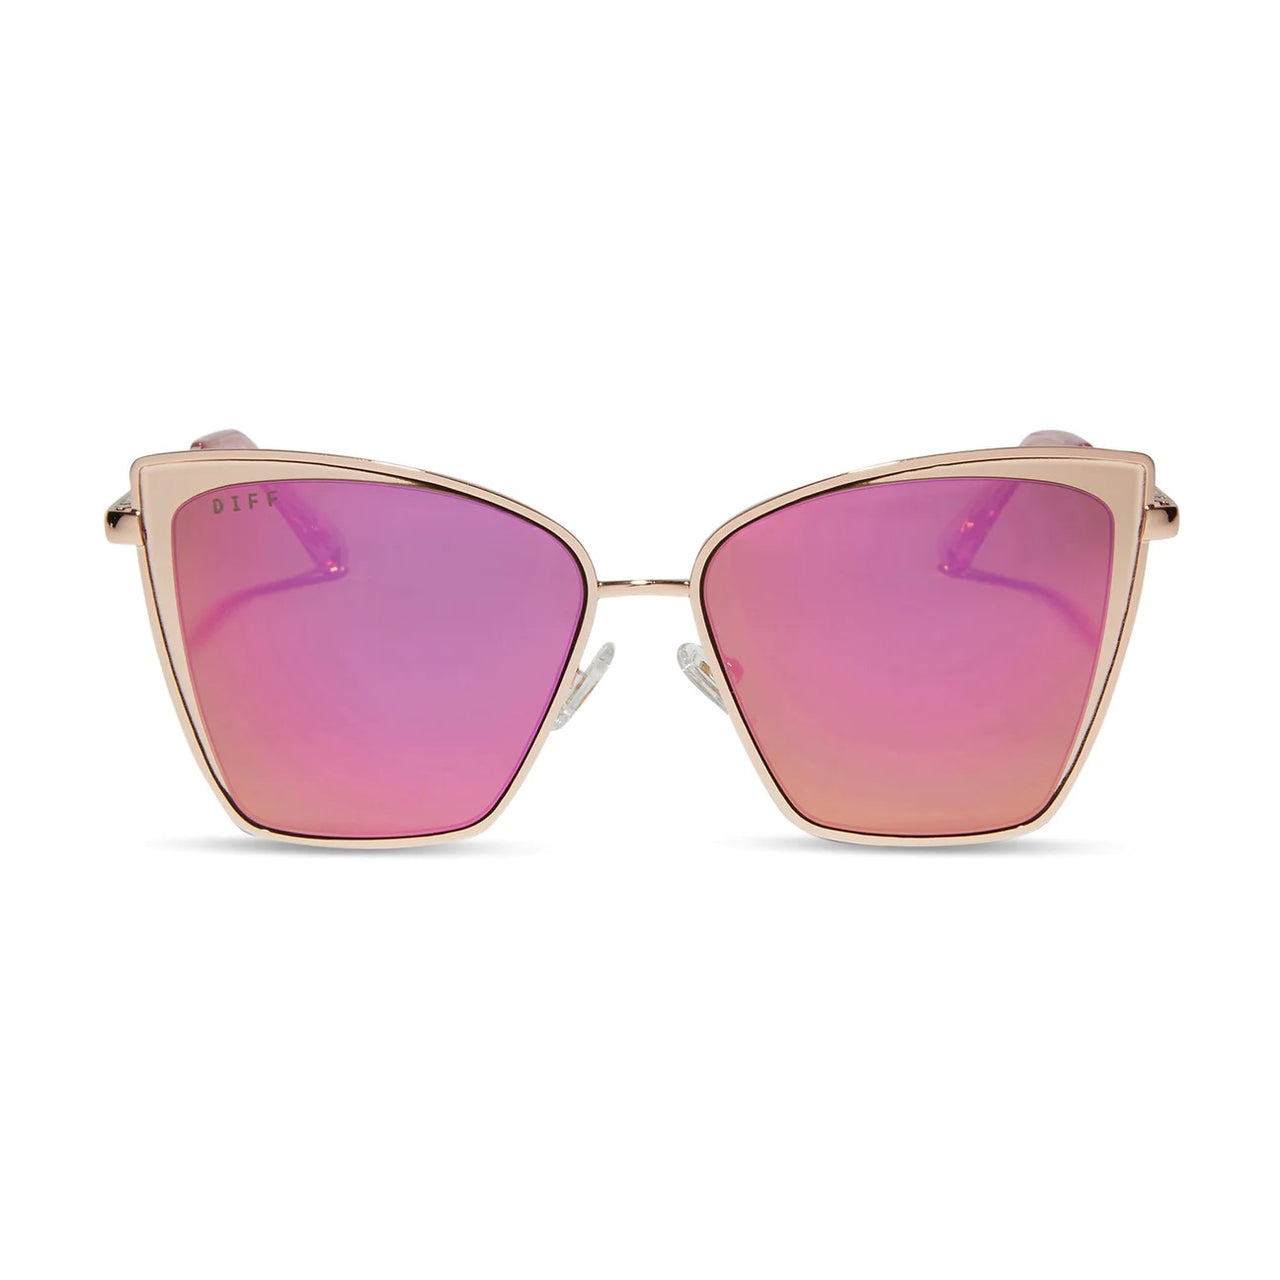 {DIFF} Becky- rose gold + pink mirror sunglasses